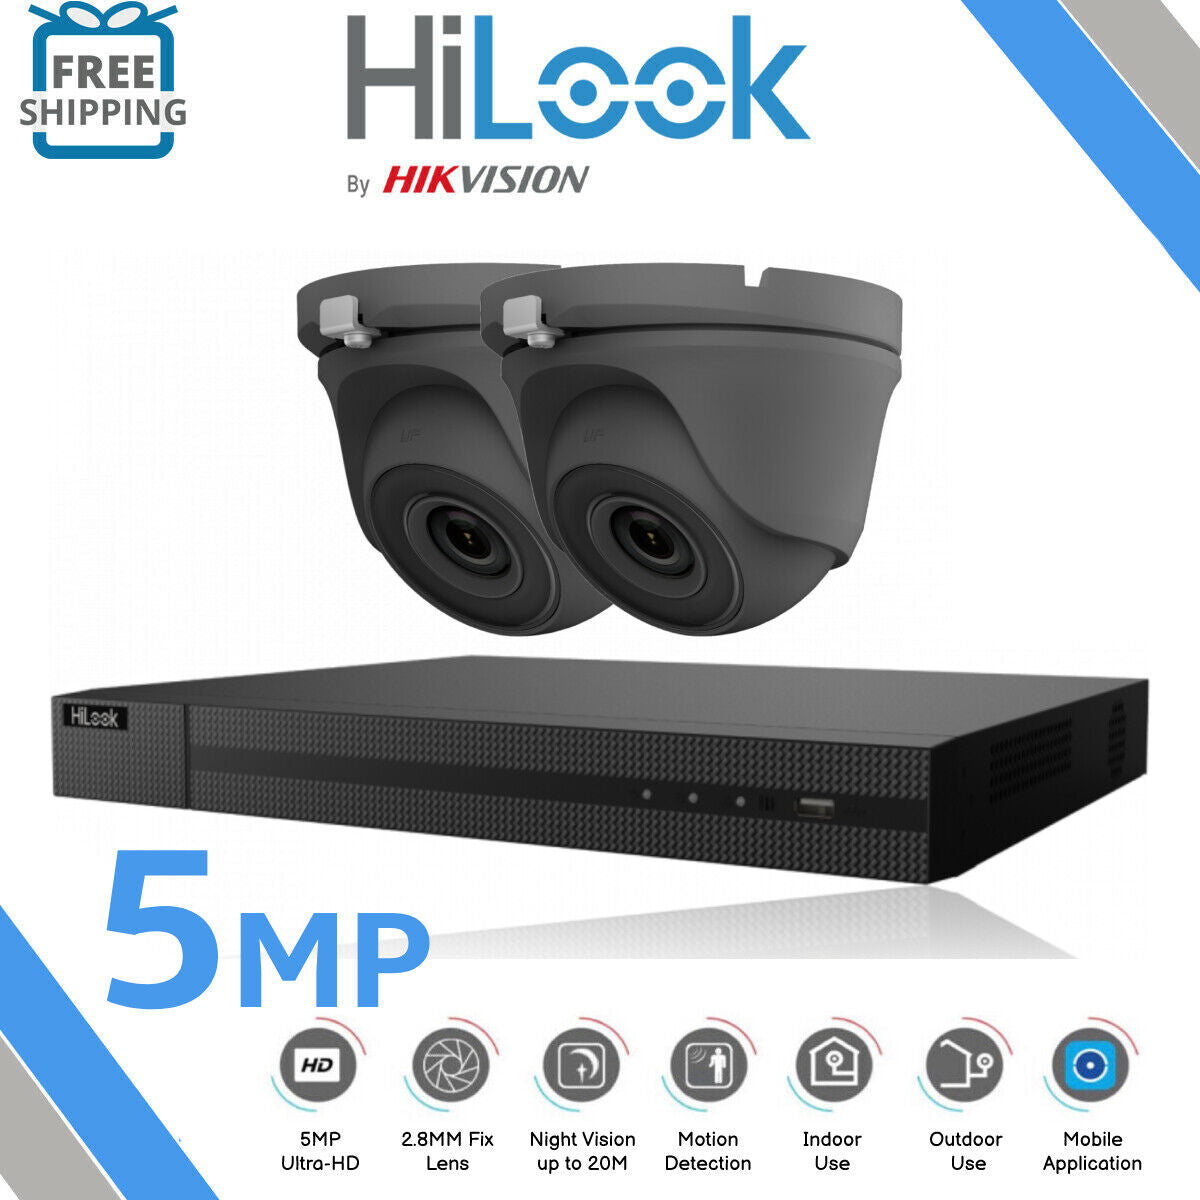 CCTV ULTRA HD 5MP NIGHTVISION OUTDOOR DVR HIK-CONNECT HOME SECURITY SYSTEM KIT 4CH DVR 2x Cameras (grey) 2TB HDD